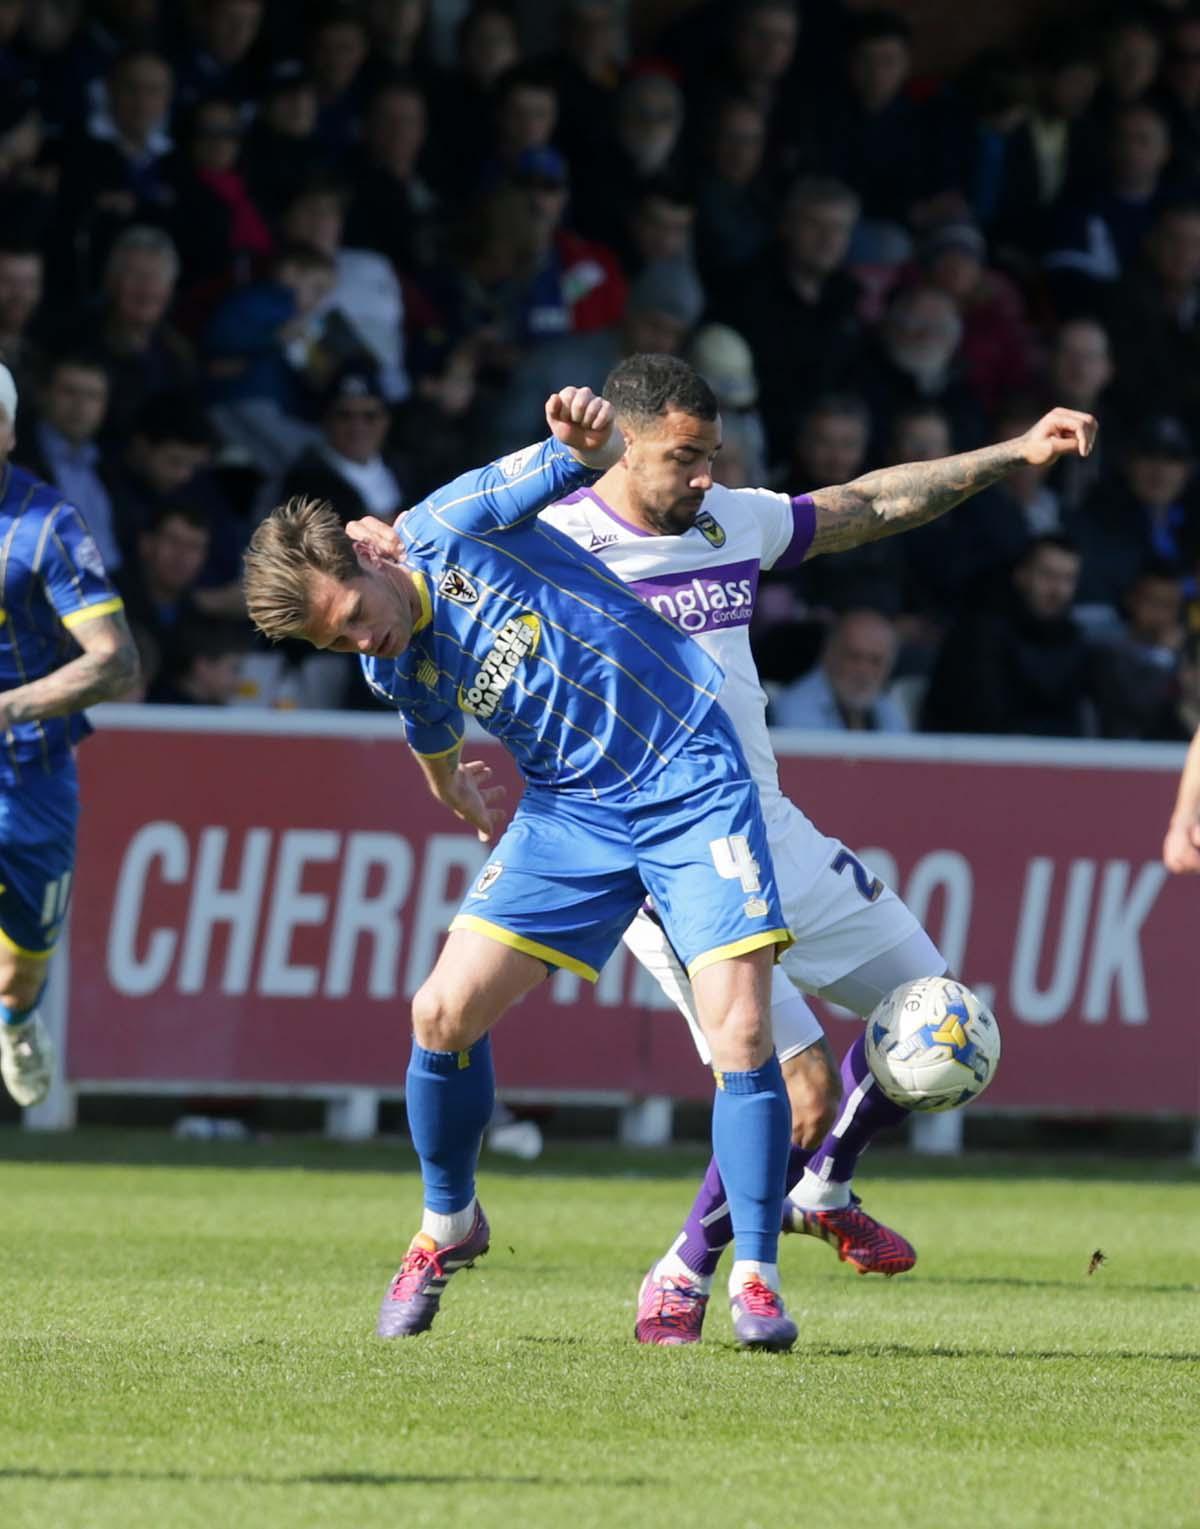 AFC Wimbledon v Oxford United at Cherry Red Records Stadium. Saturday April 11th 2015. IN PICTURES